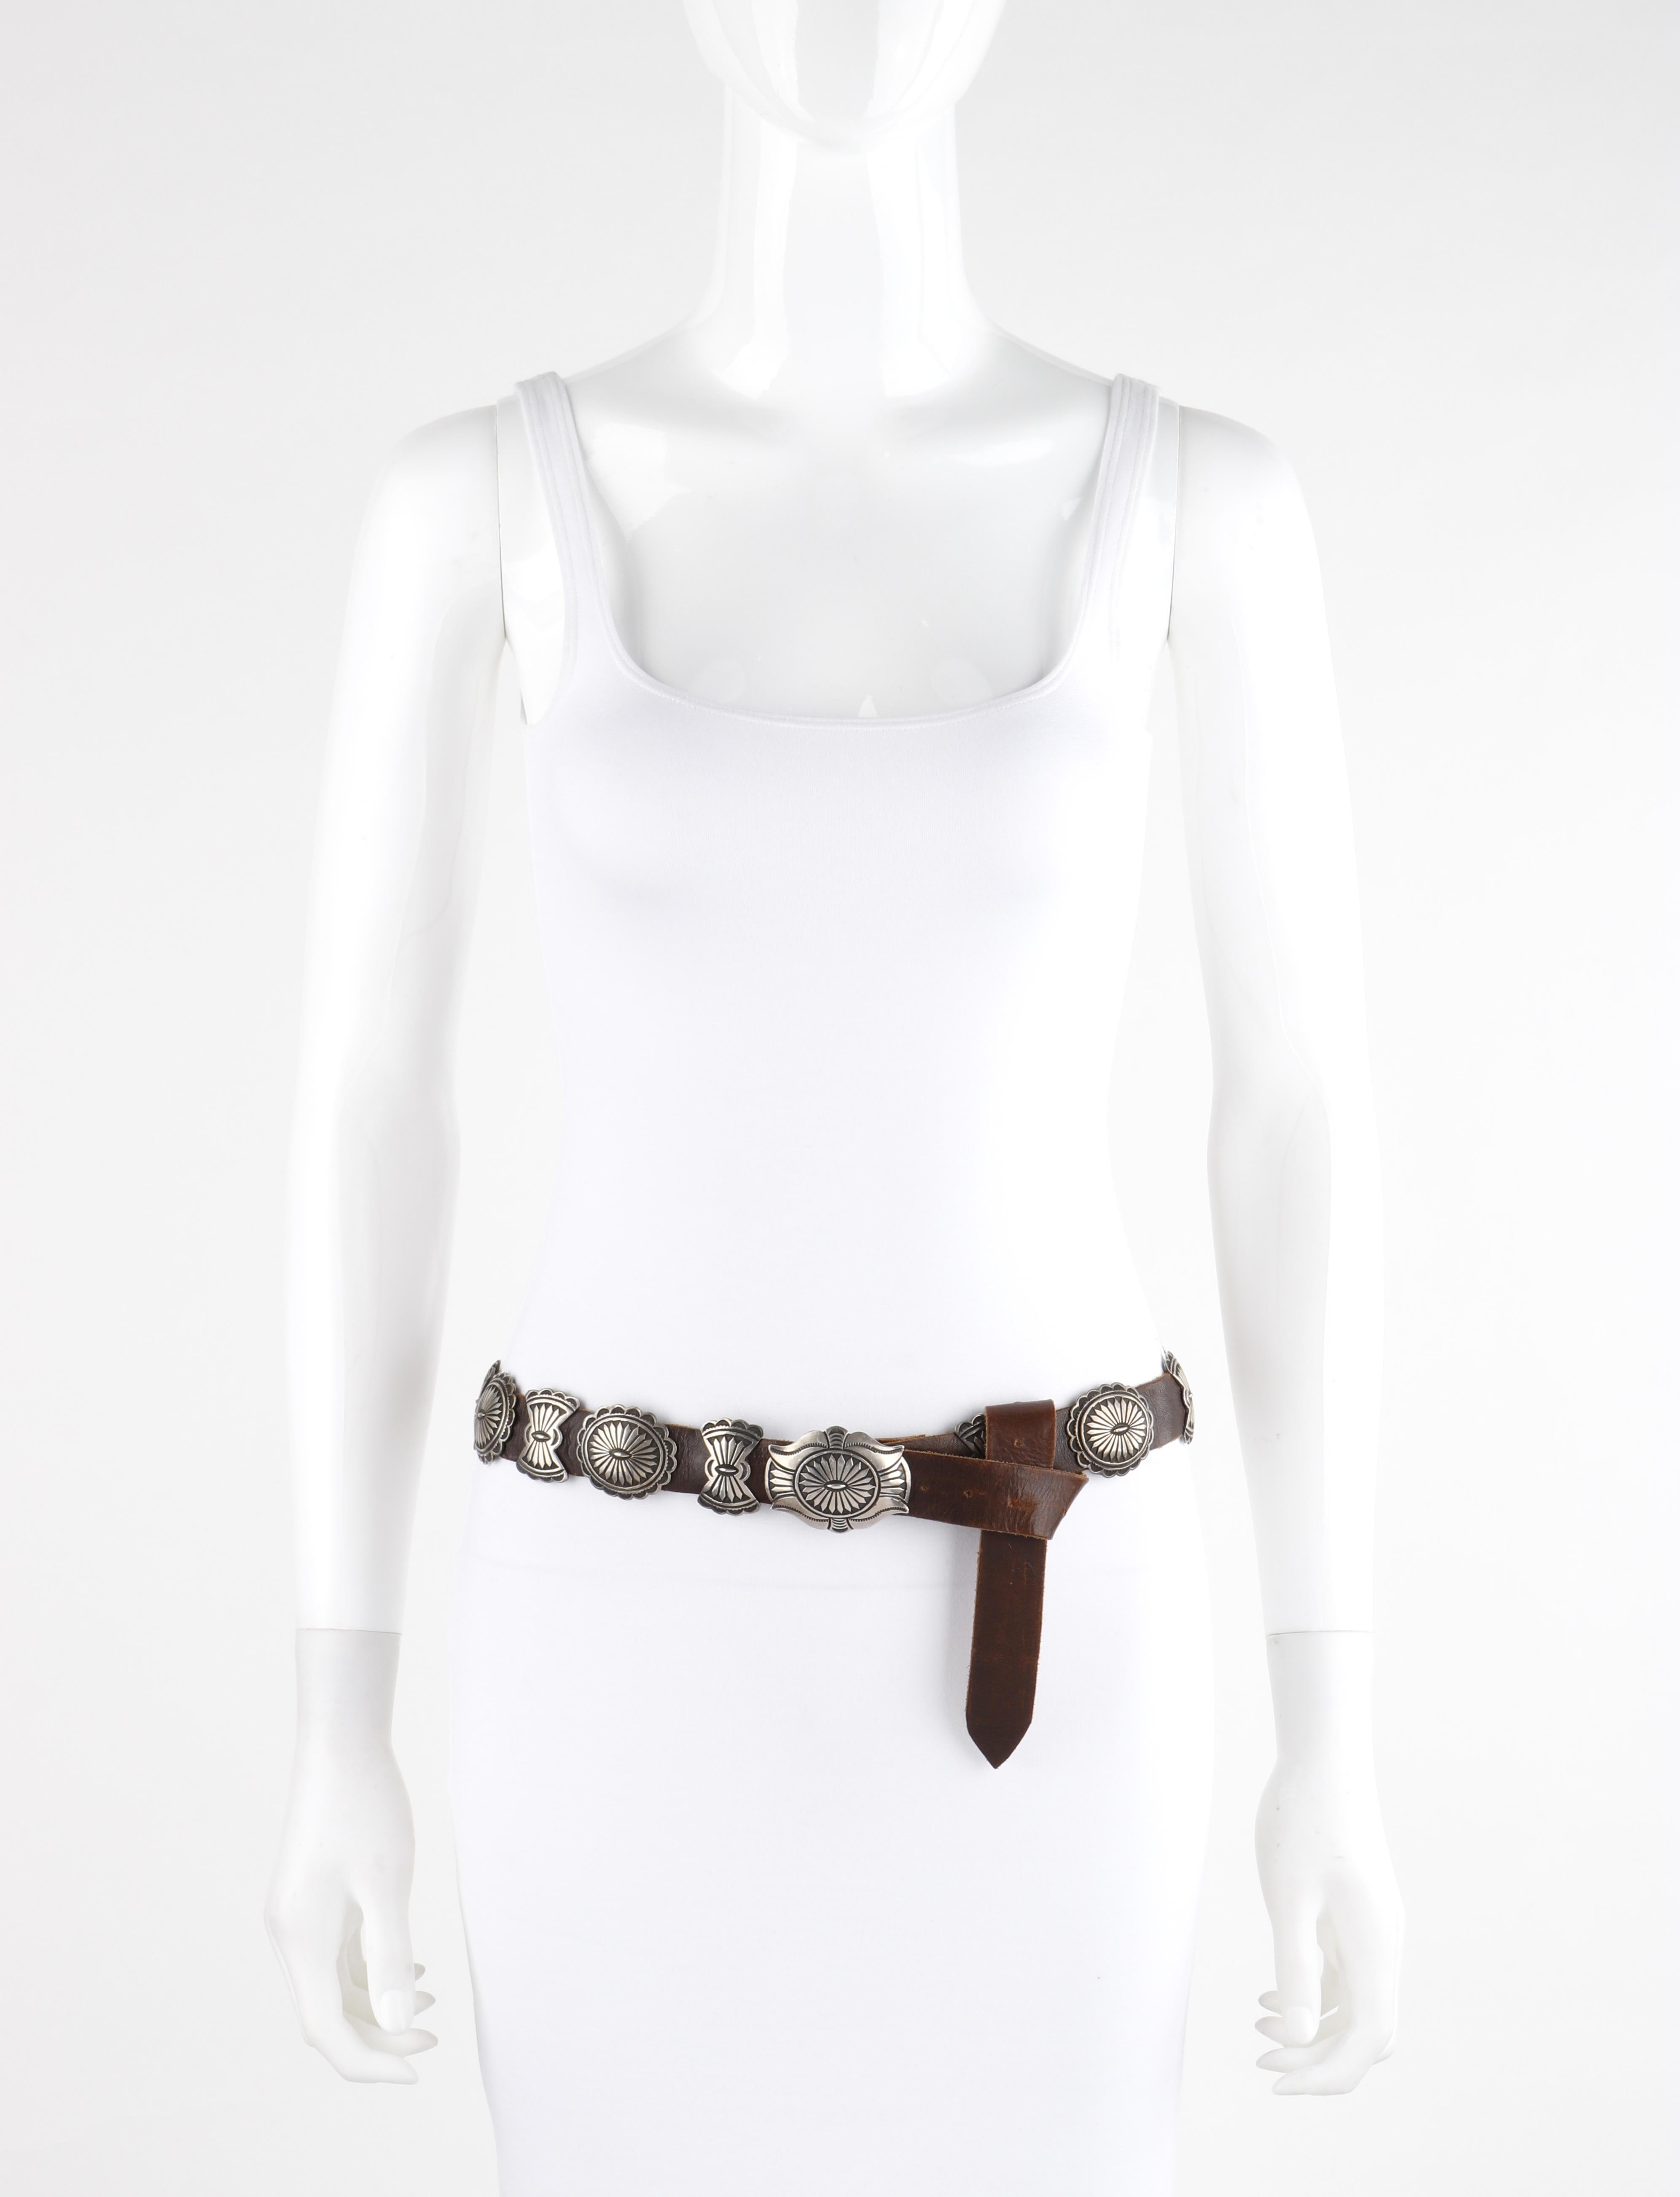 how to wear a concho belt